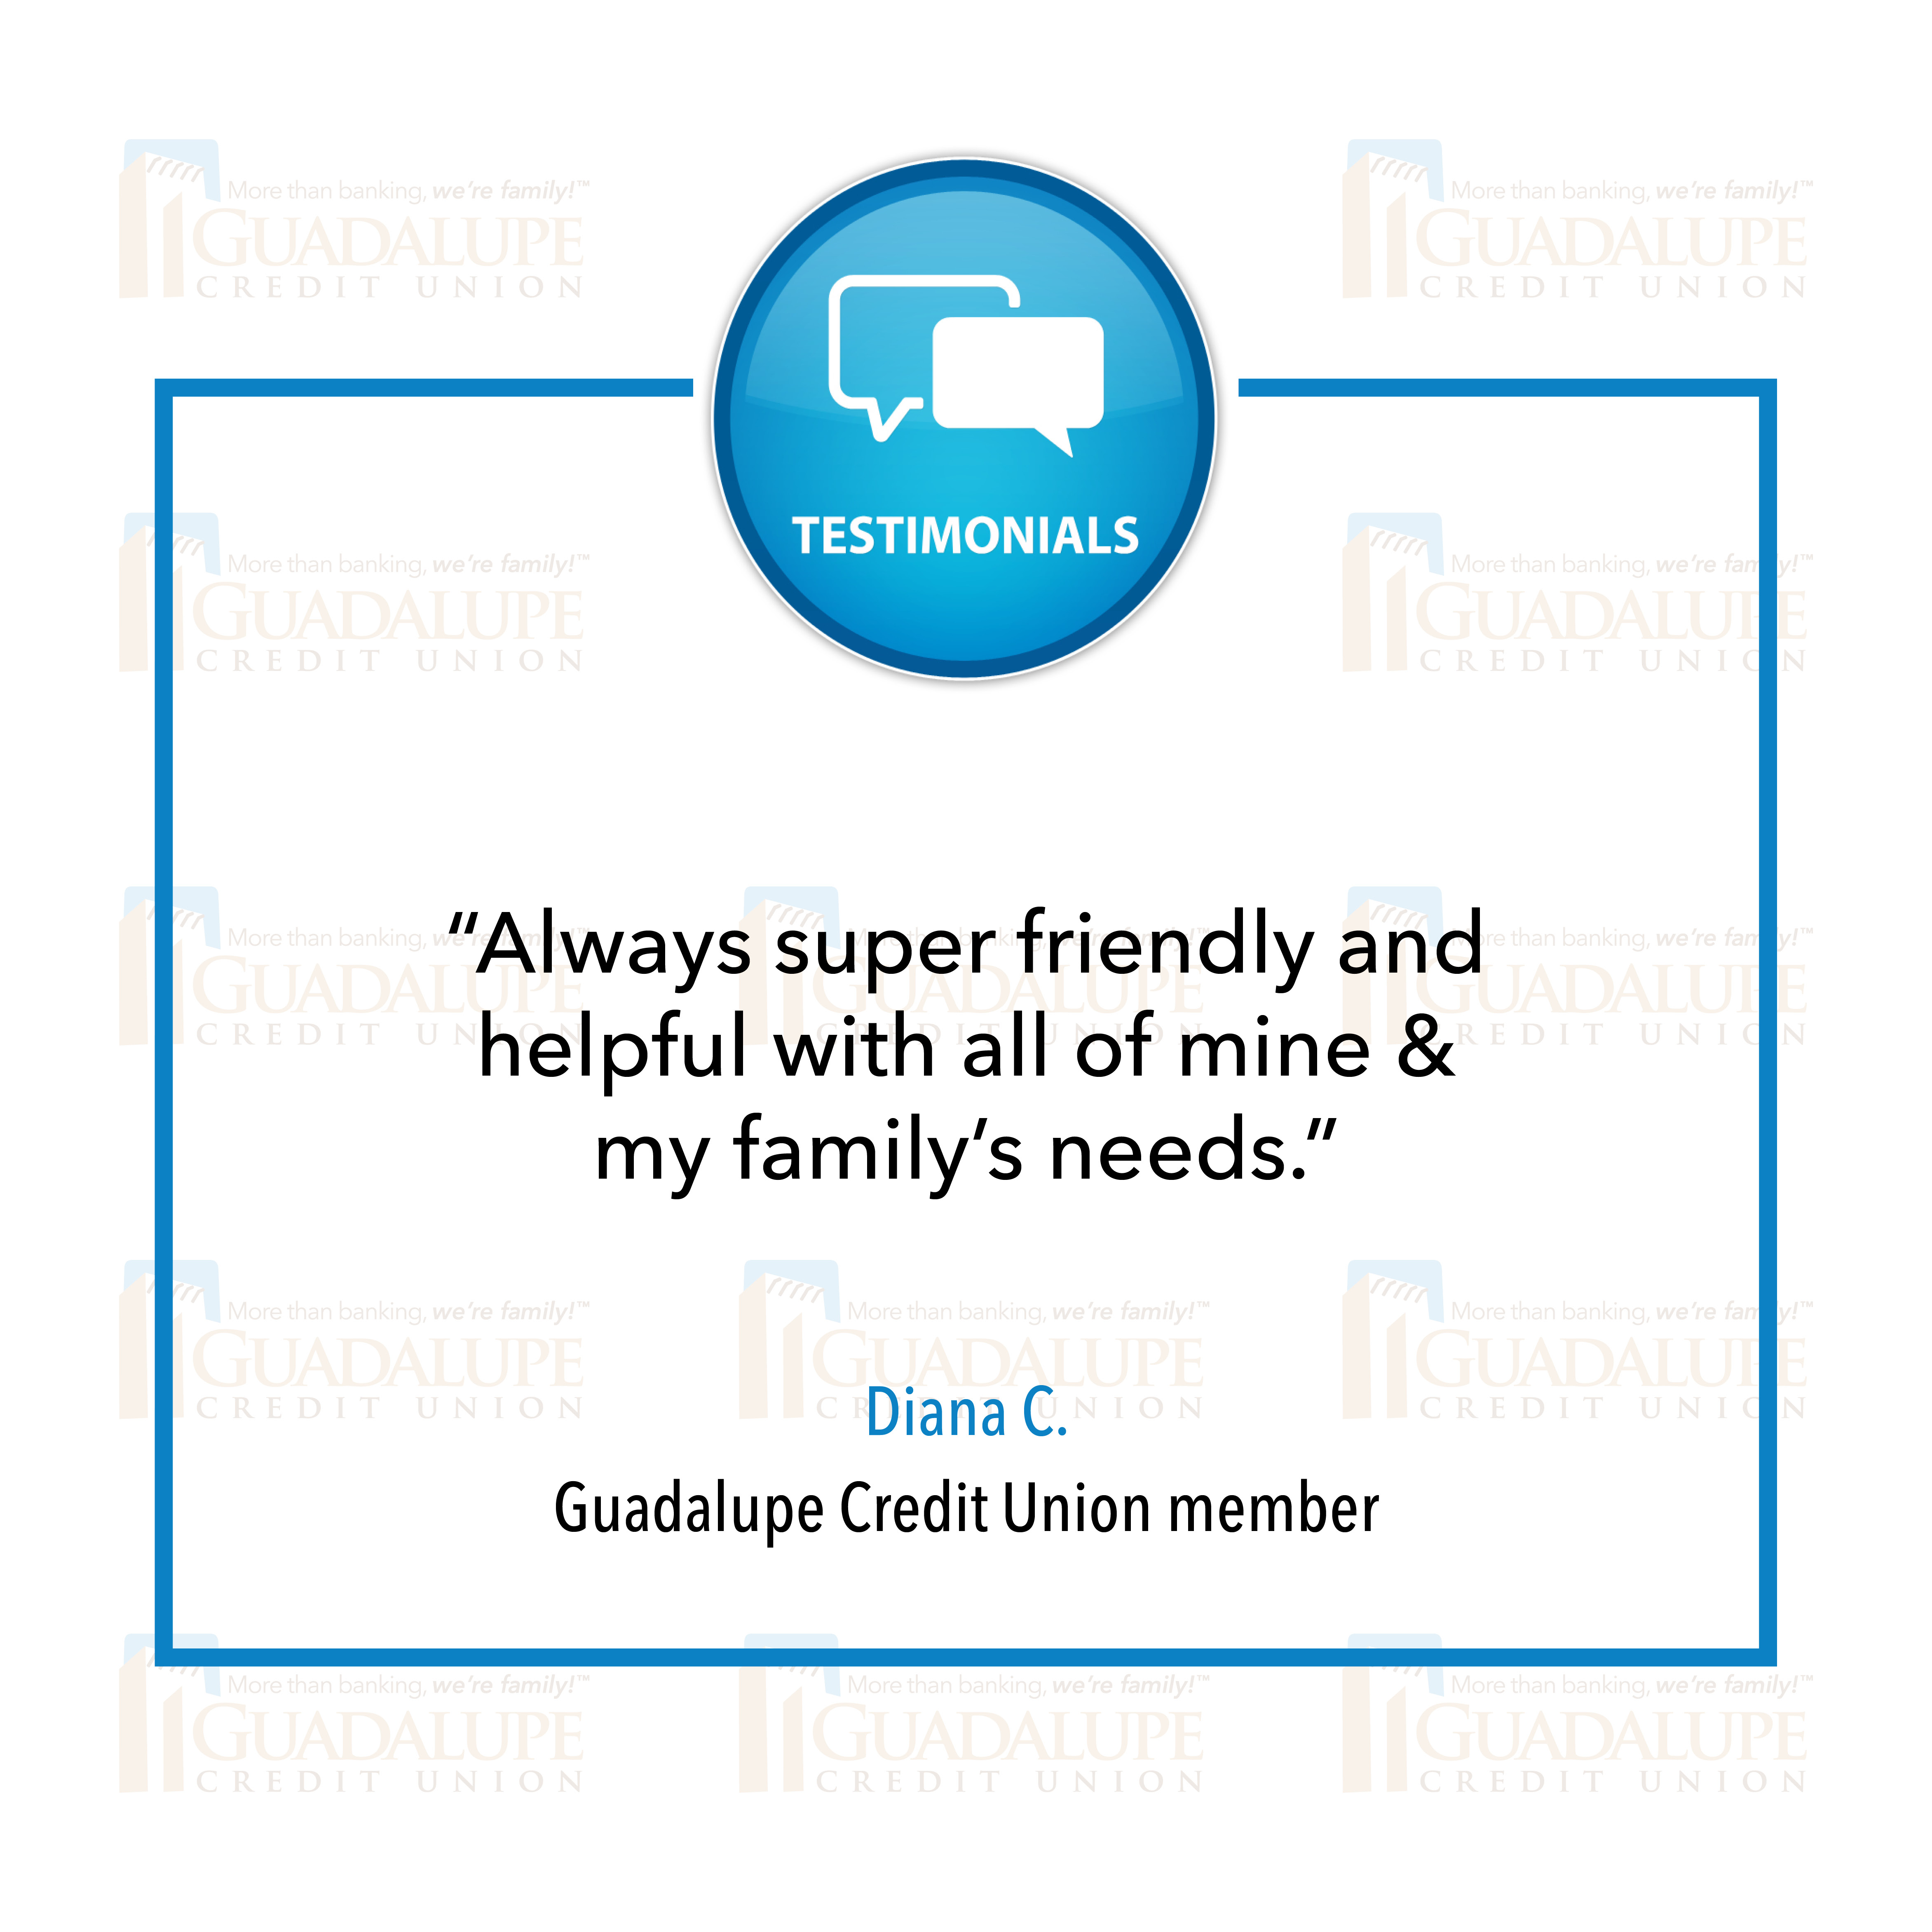 GCU Testimonial - "Always super friendly and helpful with all of mine and my family's needs."